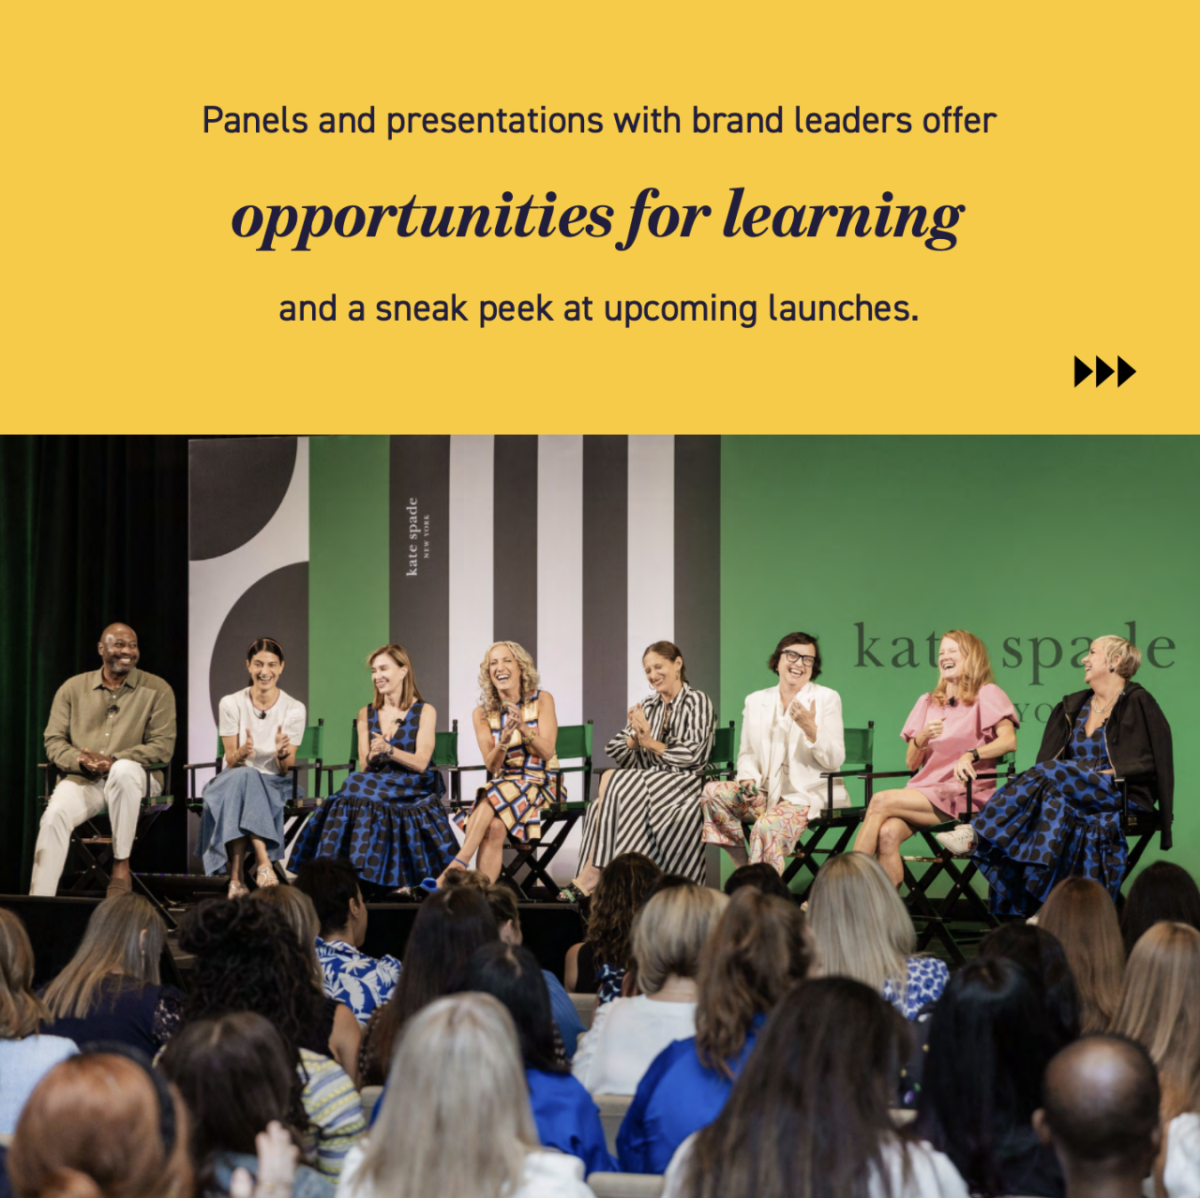 "Panels and presentations with brand leaders offer opportunities for learning and a sneak peek at upcoming launches."